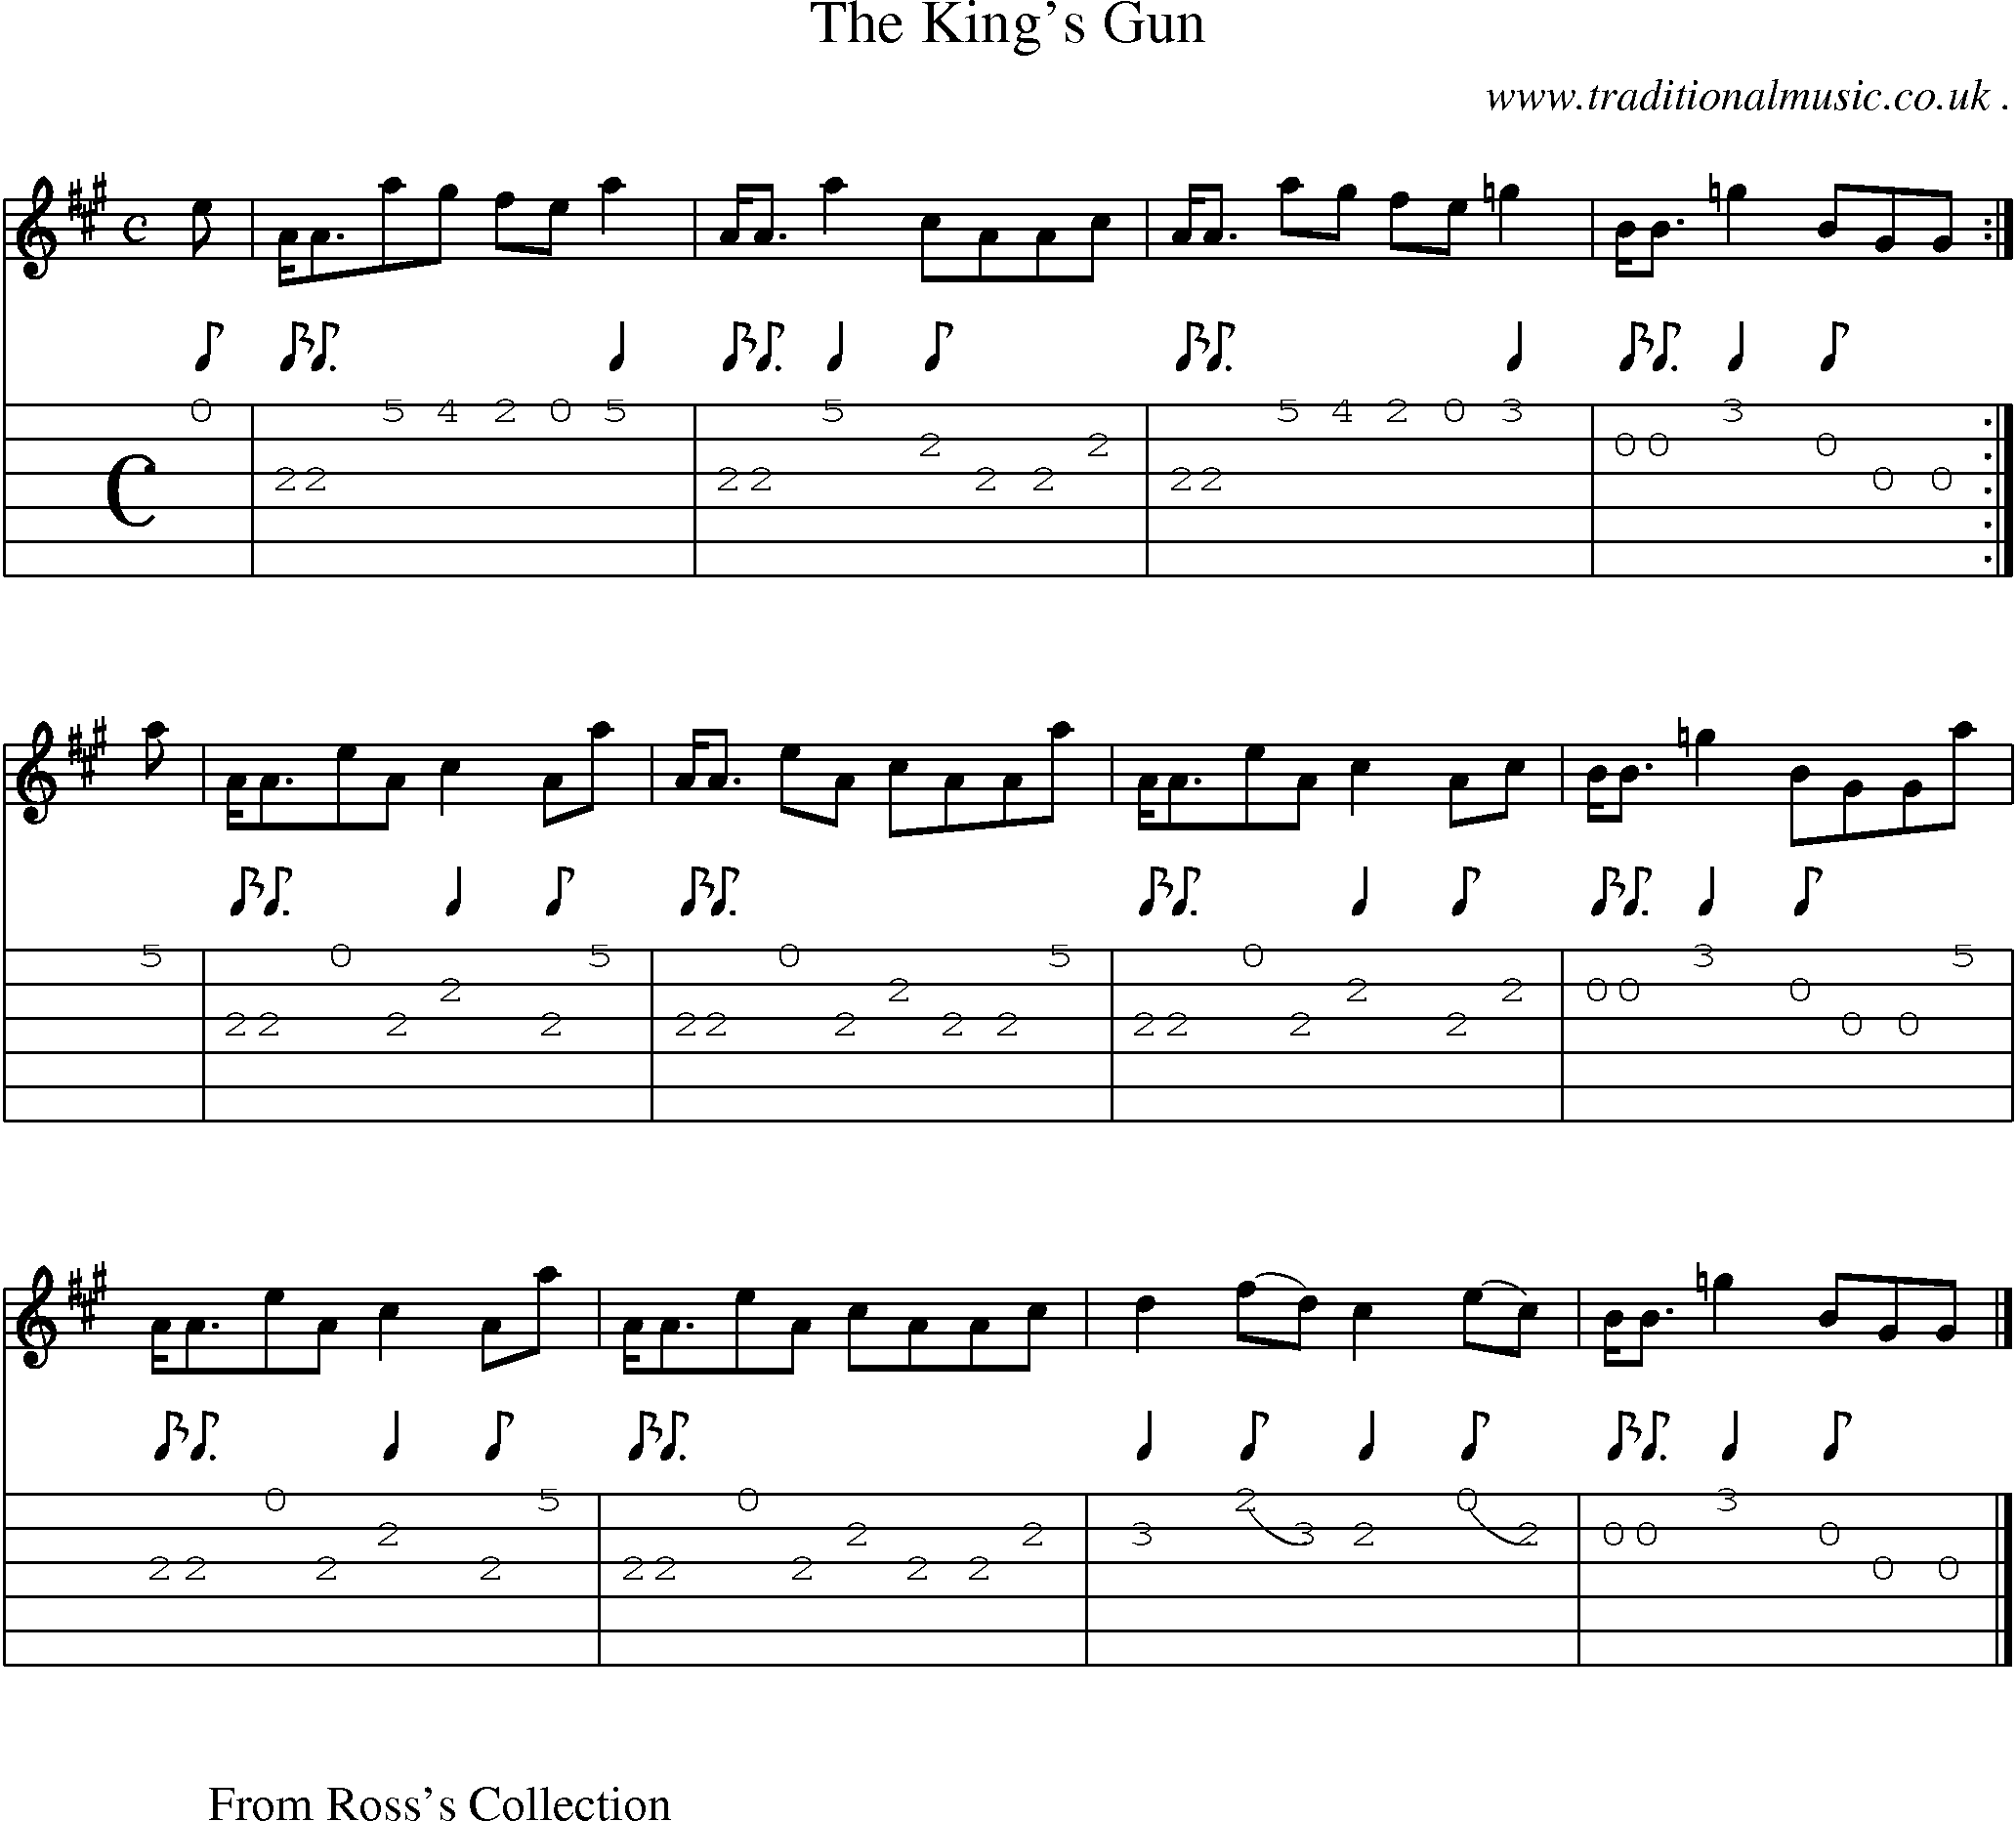 Sheet-music  score, Chords and Guitar Tabs for The Kings Gun